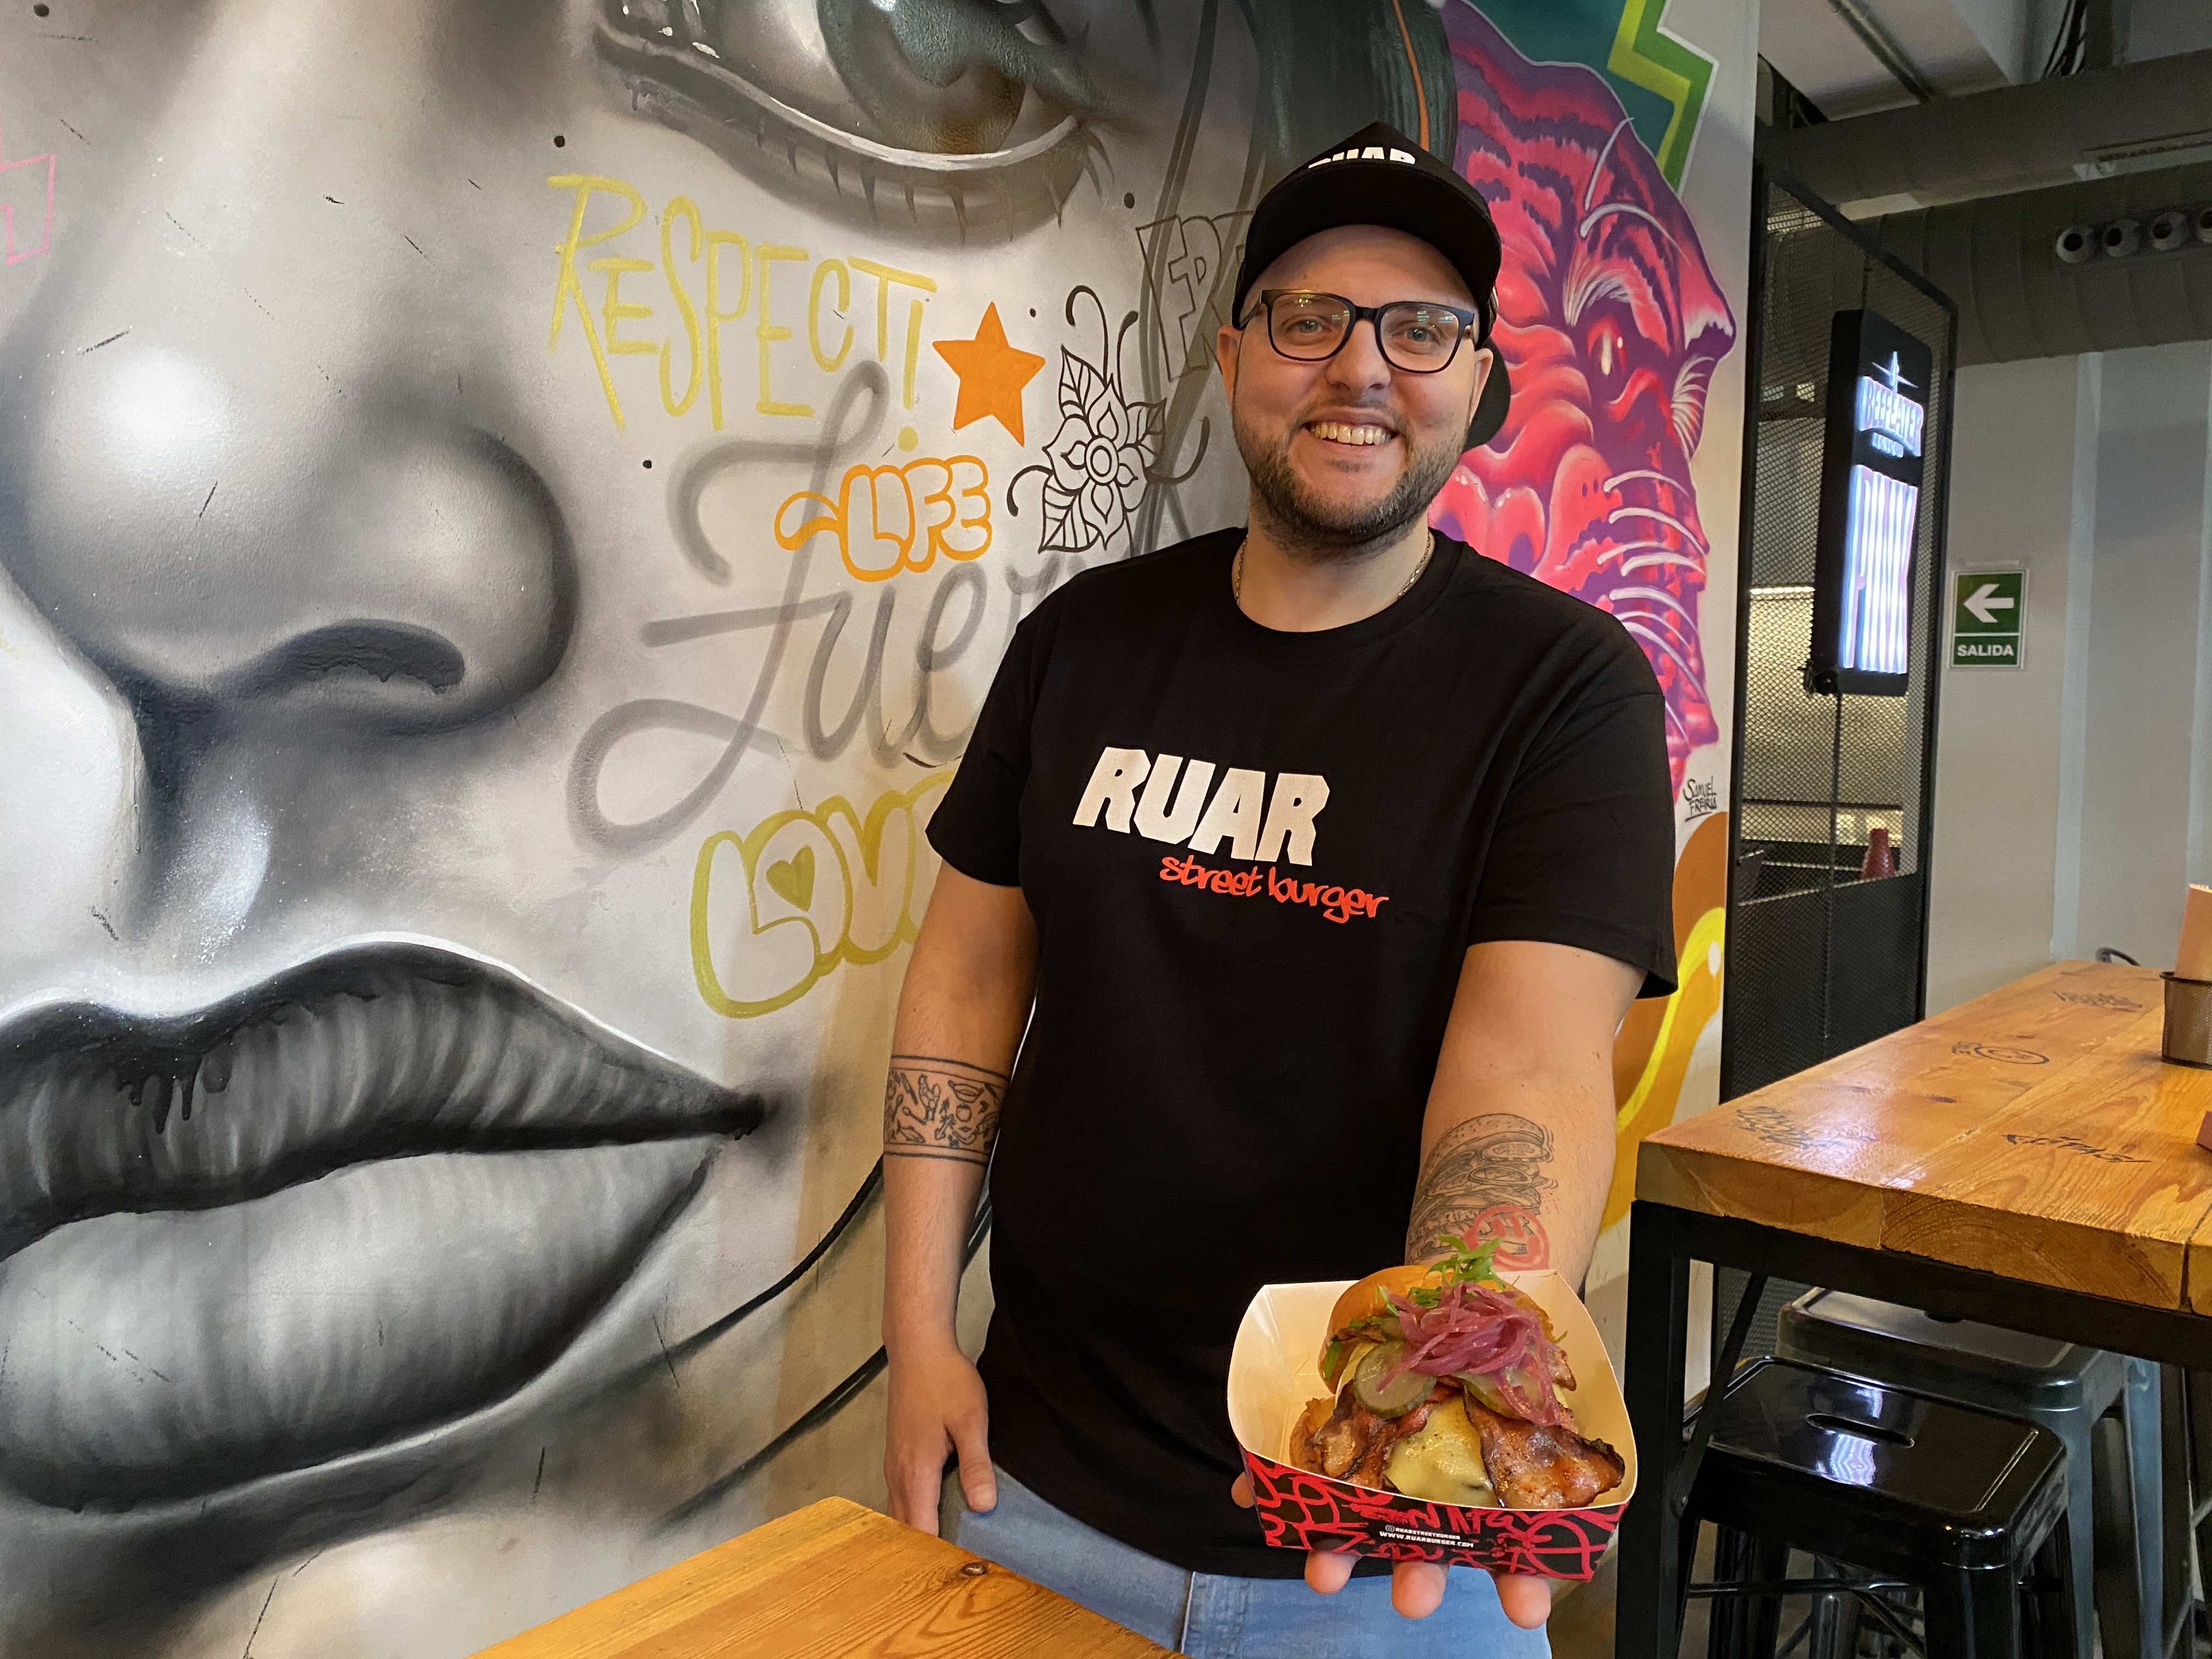 CEO and chef Fabio Souza is looking to expand his business into a franchise